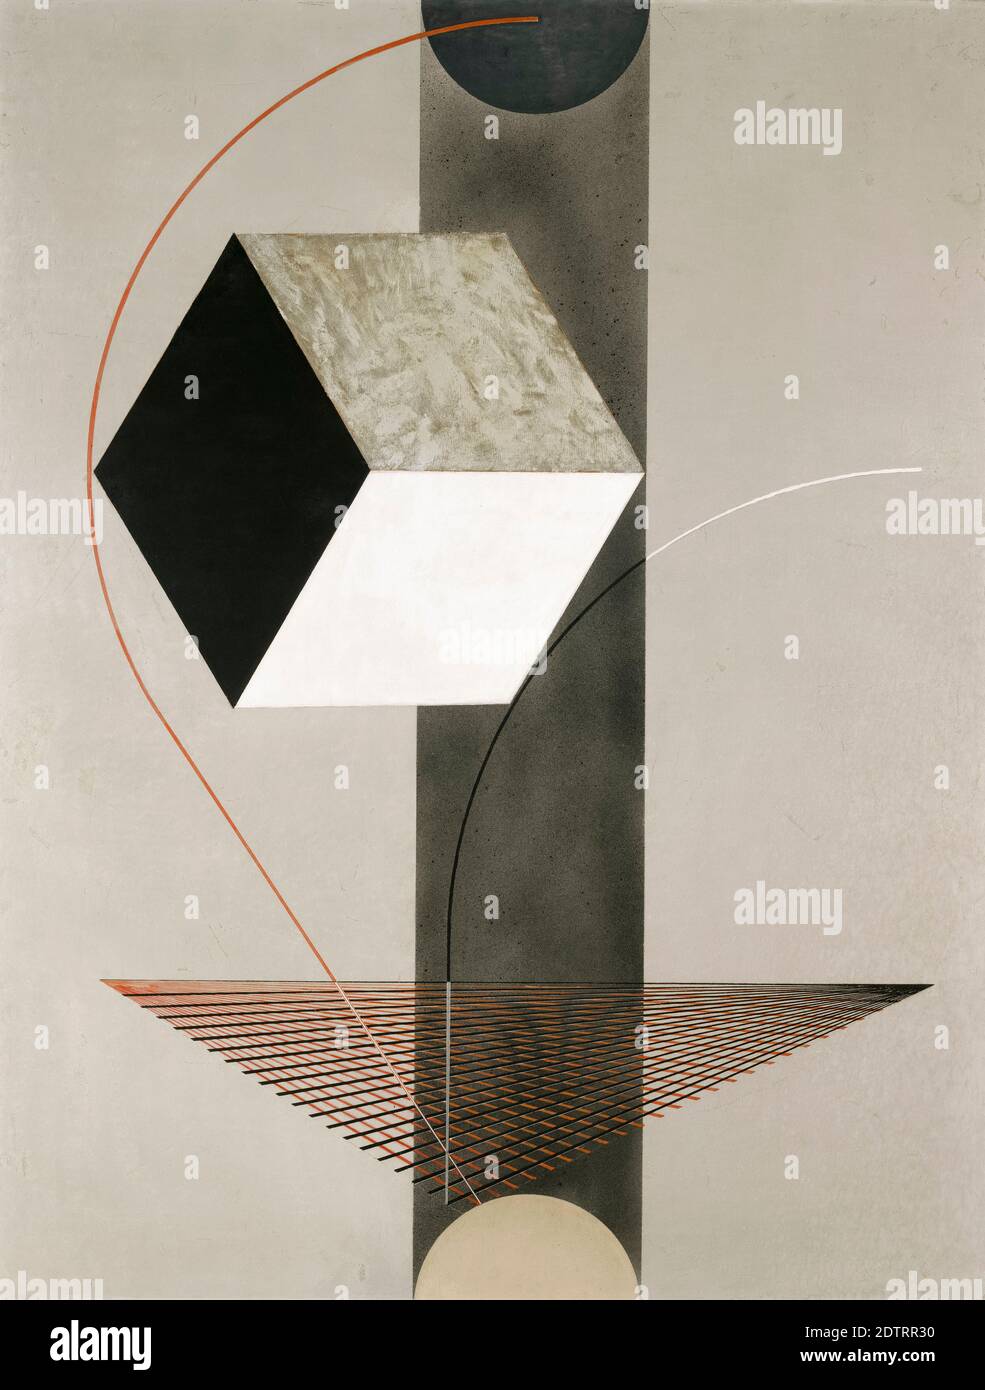 El Lissitzky, abstract painting, Proun 99, 1923-1925 Stock Photo